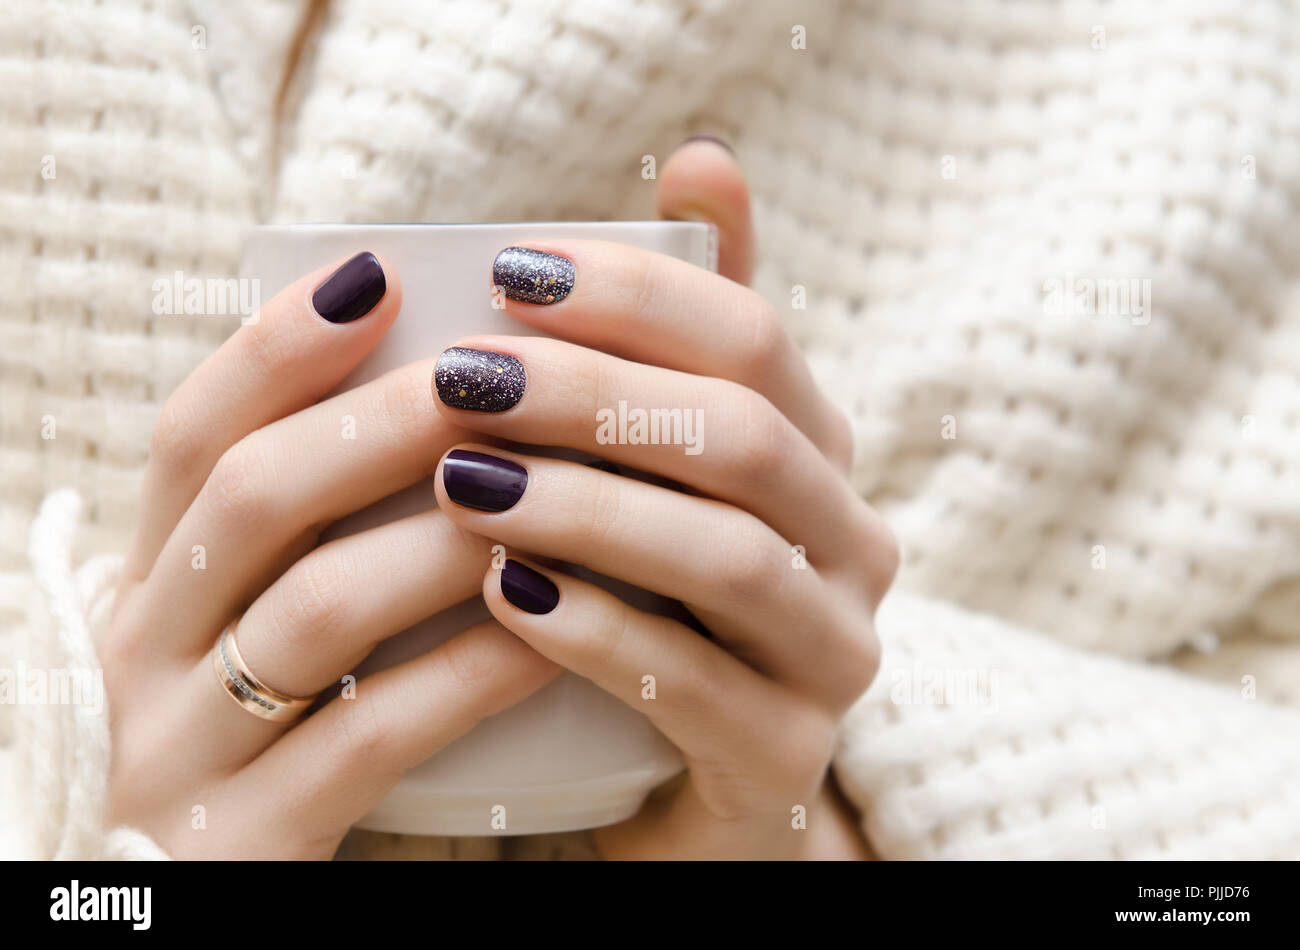 Chocolate Brown Nail Polish Is Turning Out To Be This Season's It-Shade